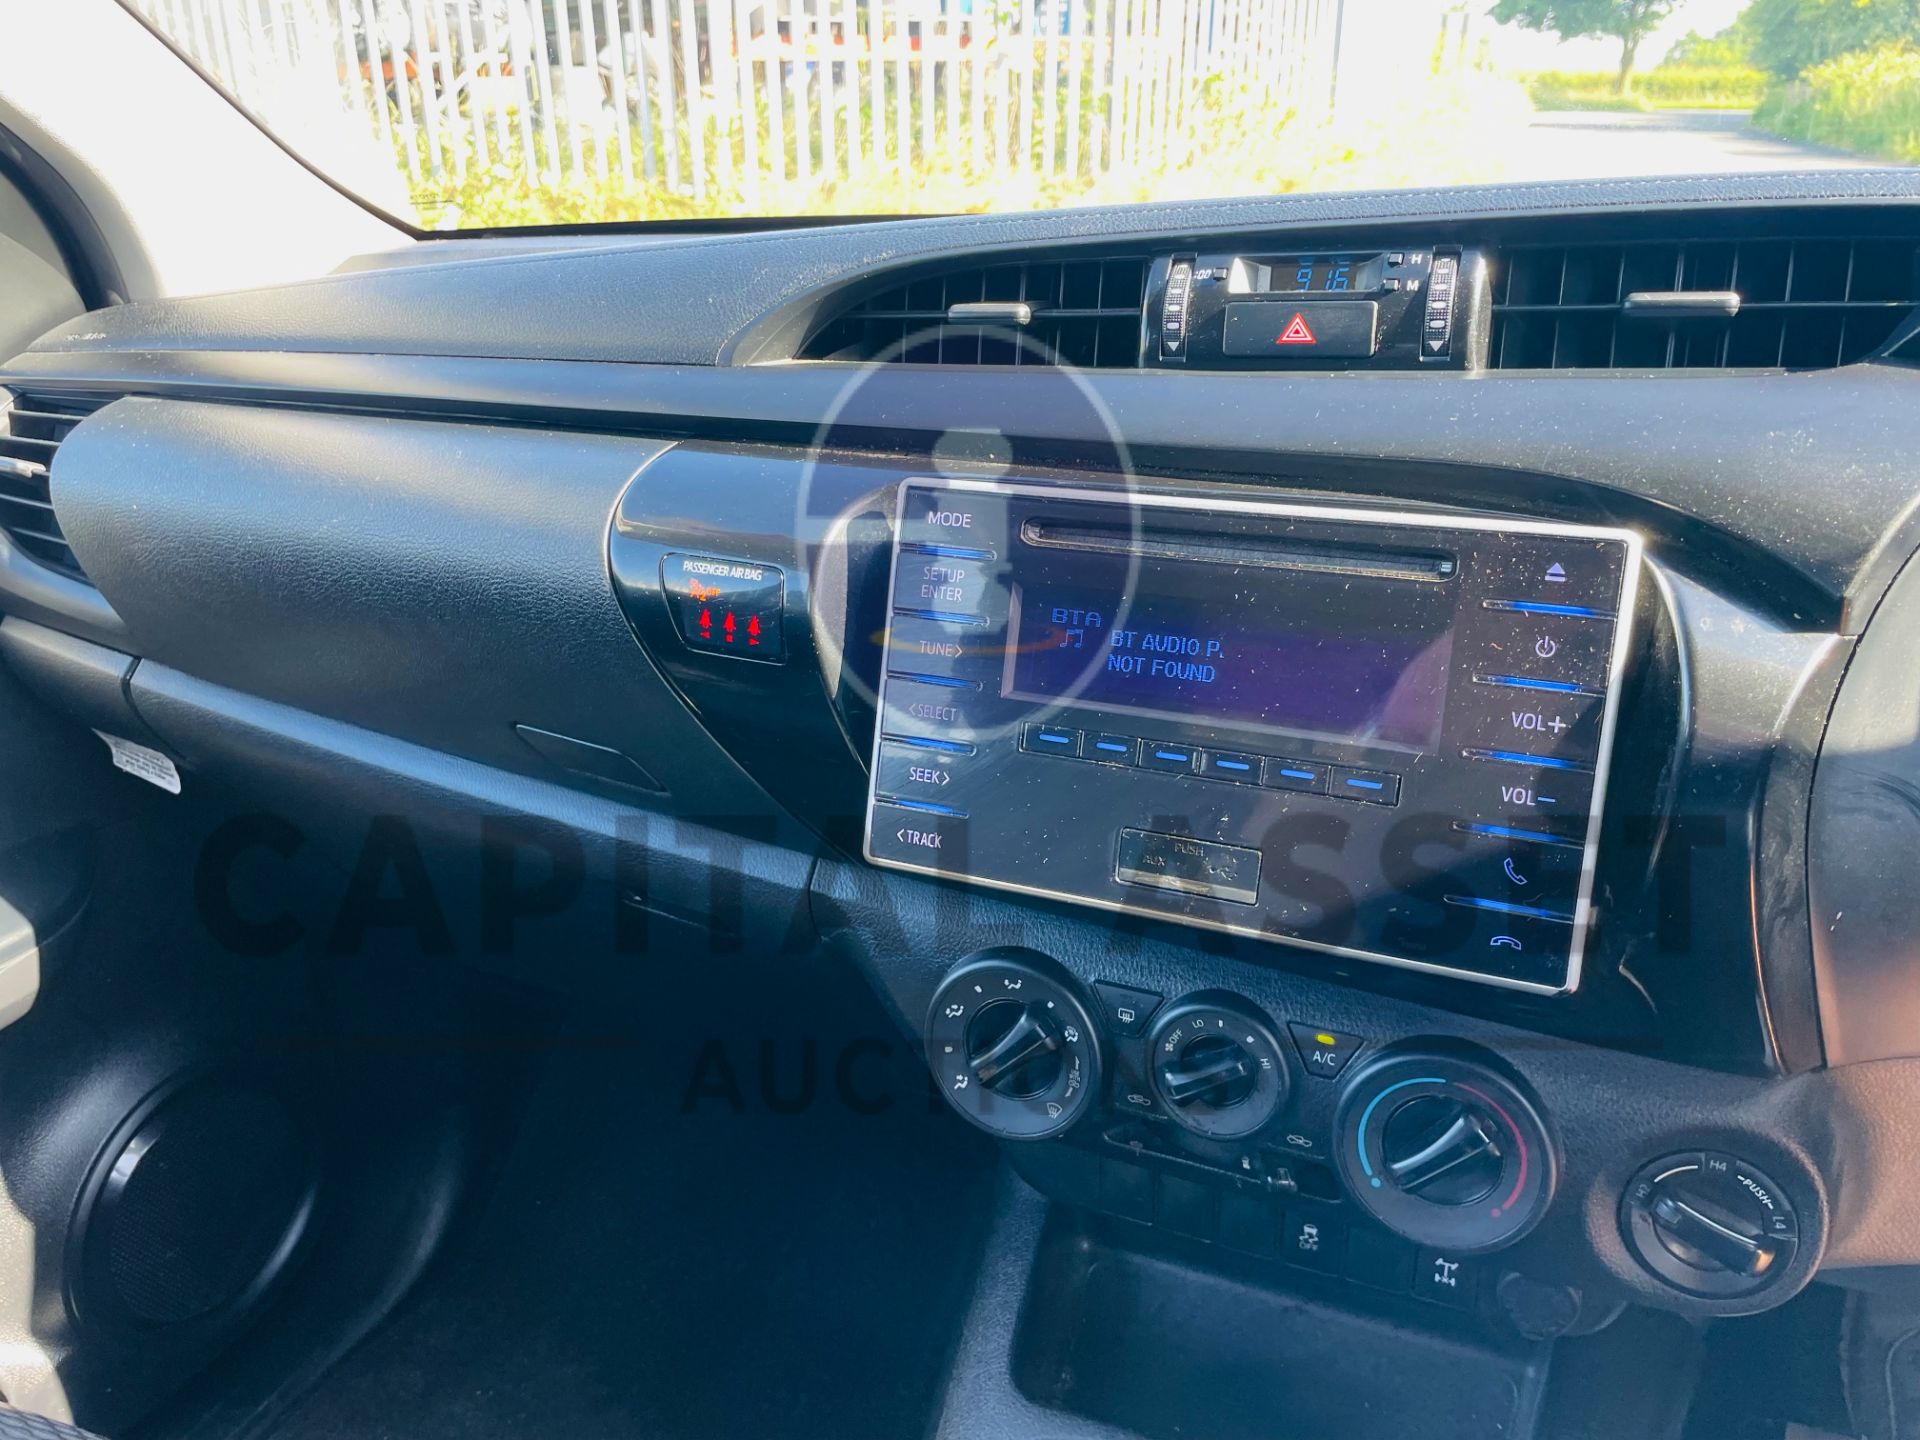 (On Sale) TOYOTA HILUX *DOUBLE CAB PICK-UP* (2018 - EURO 6) 2.4 D-4D - 6 SPEED *ONLY 52,000 MILES* - Image 36 of 43